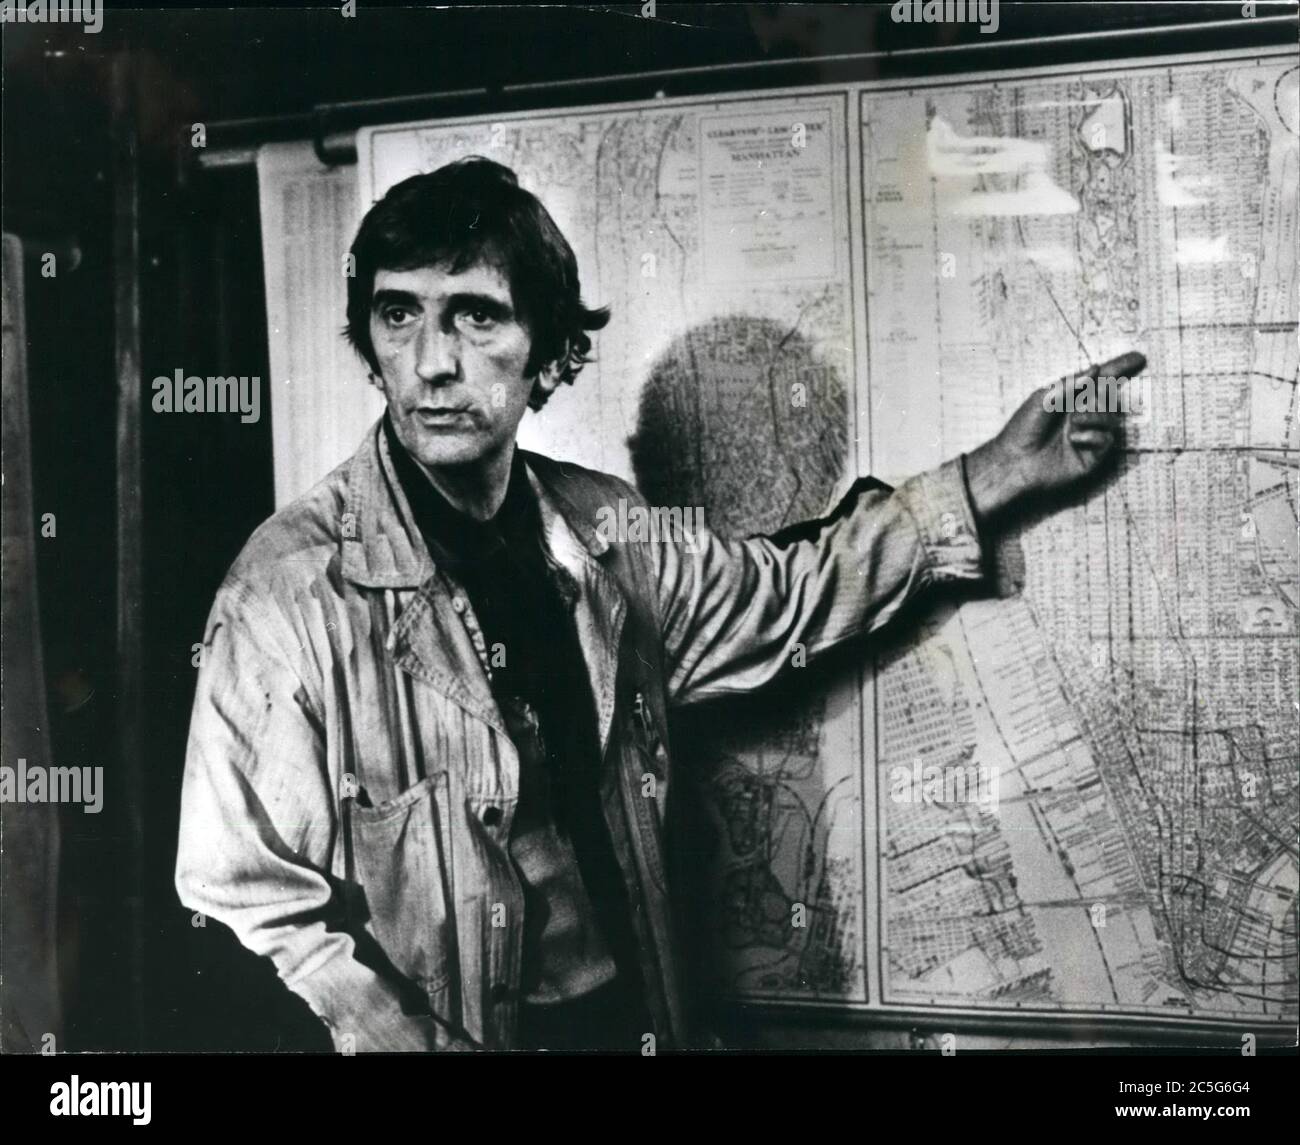 1980 - U.S. - Film still of HARRY DEAN STANTON staring as a prison inmate named Brain who become involved in the rescue of a kidnapped US President in the flim 'Escape from New York'. Exact date and place unknown. (Credit Image: © Keystone Pictures USA/ZUMAPRESS.com) Stock Photo